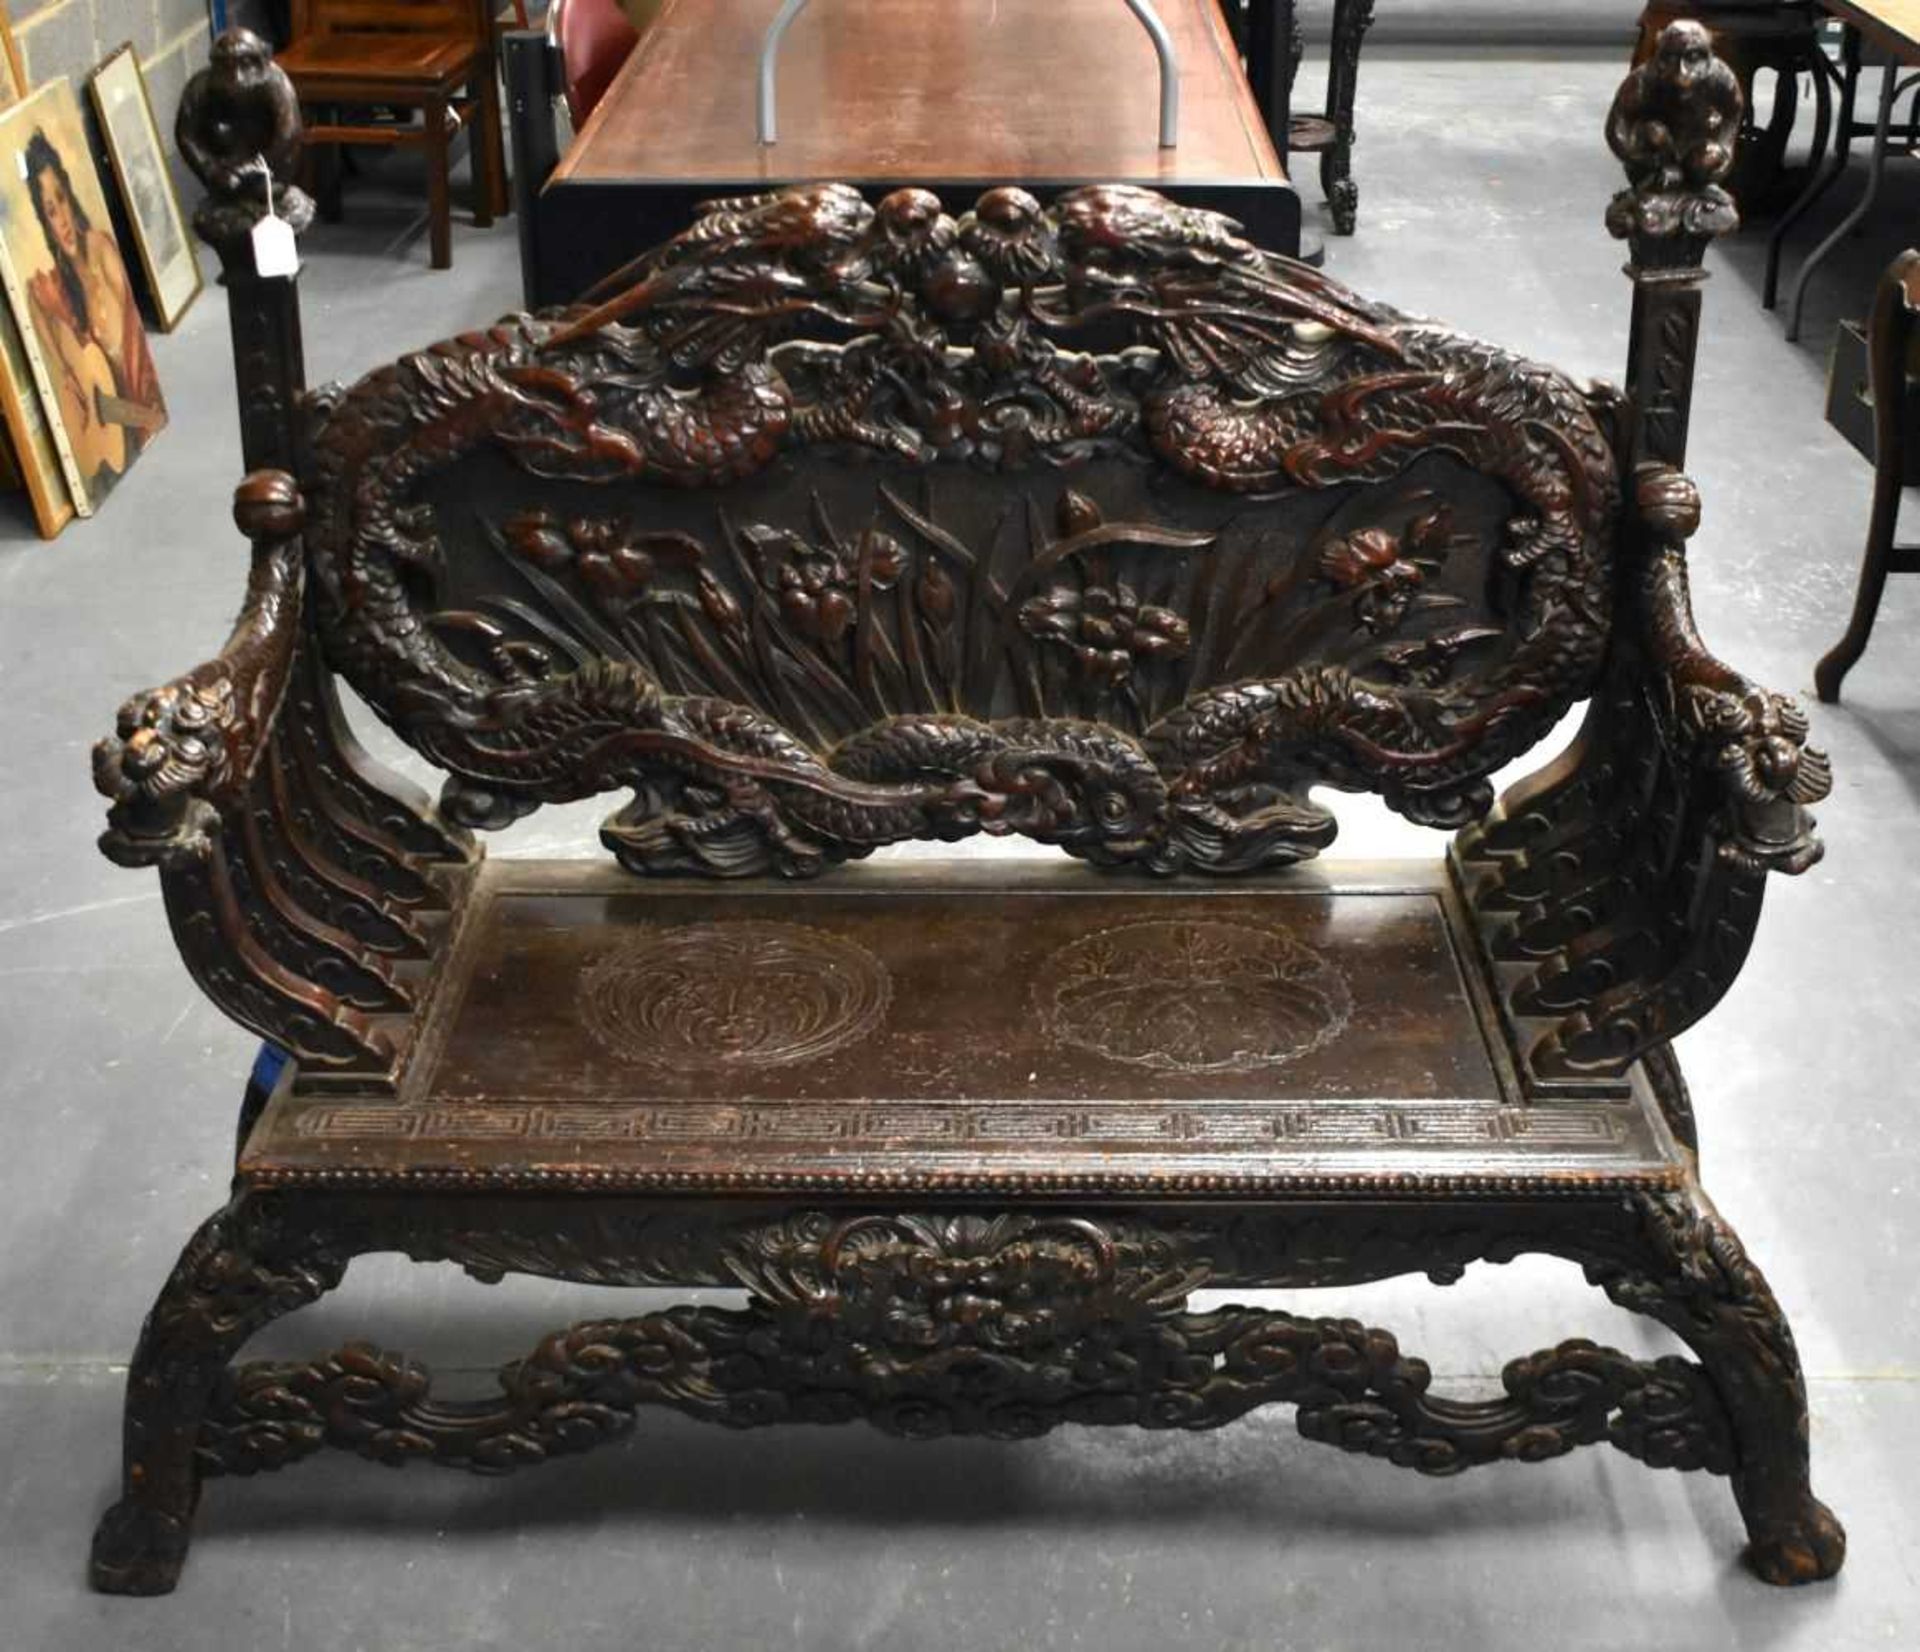 A LARGE 19TH CENTURY JAPANESE MEIJI PERIOD CARVED WOOD DRAGON BENCH. 125 cm x 125 cm.